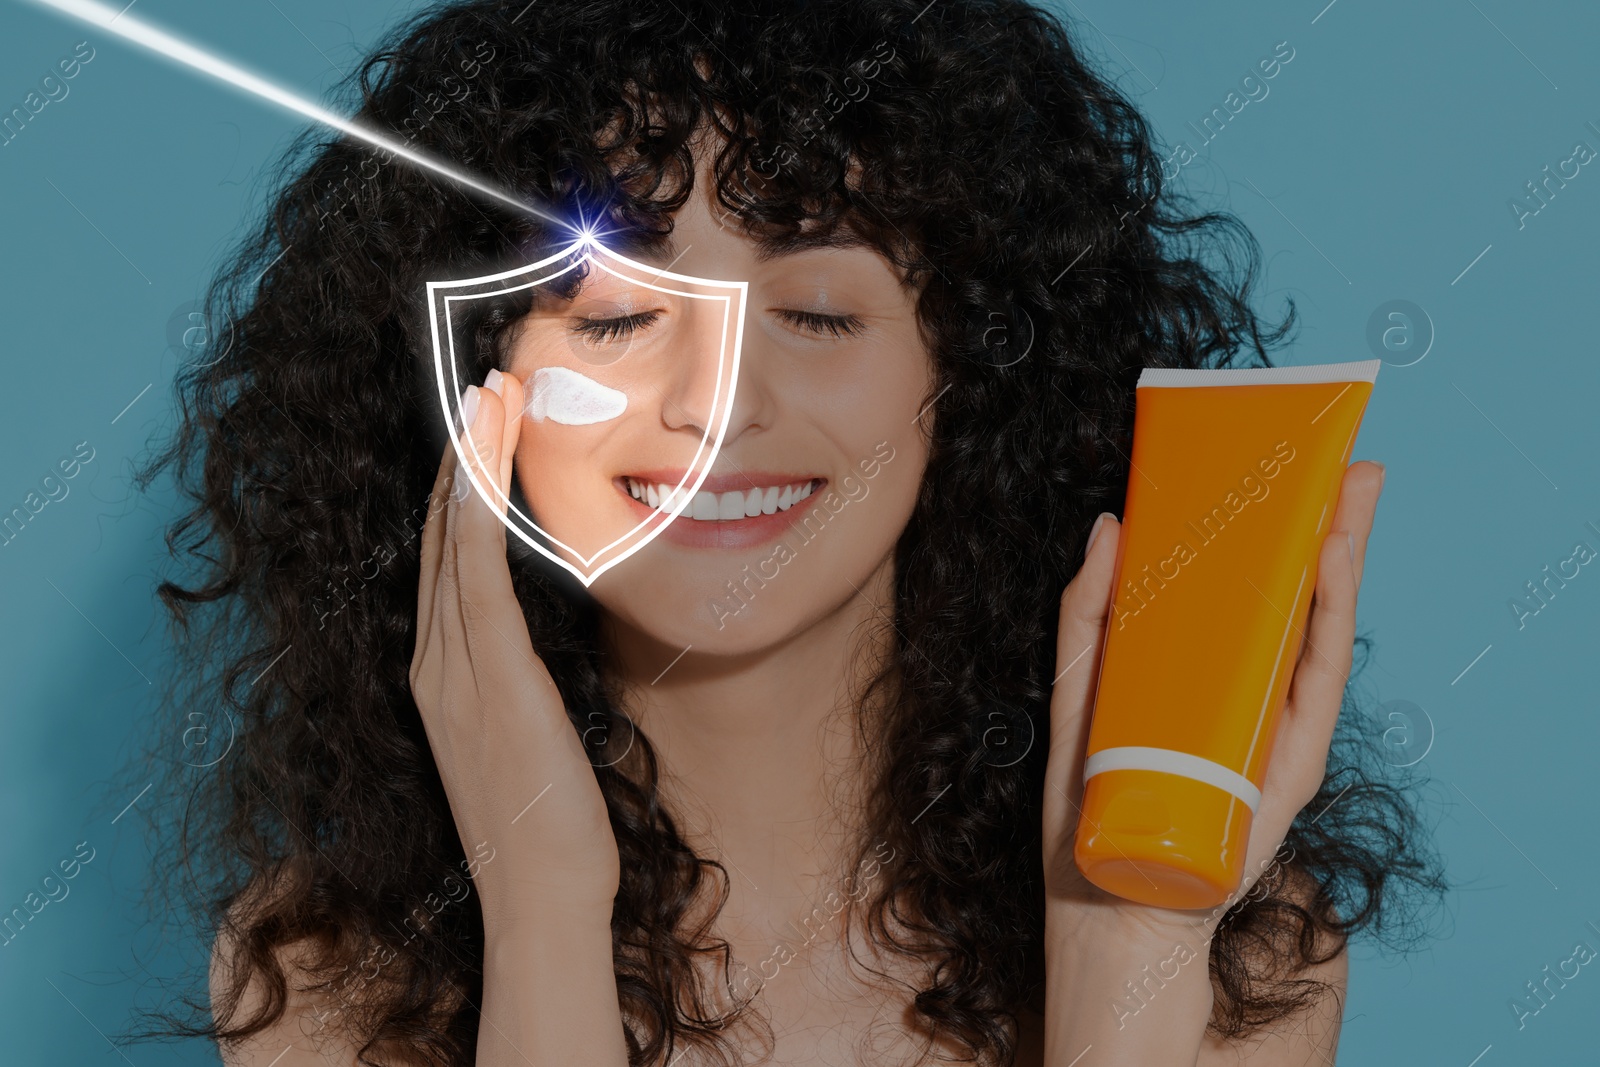 Image of Beautiful woman applying sunscreen onto face against light blue background. Illustration of shield symbolizing sun protection